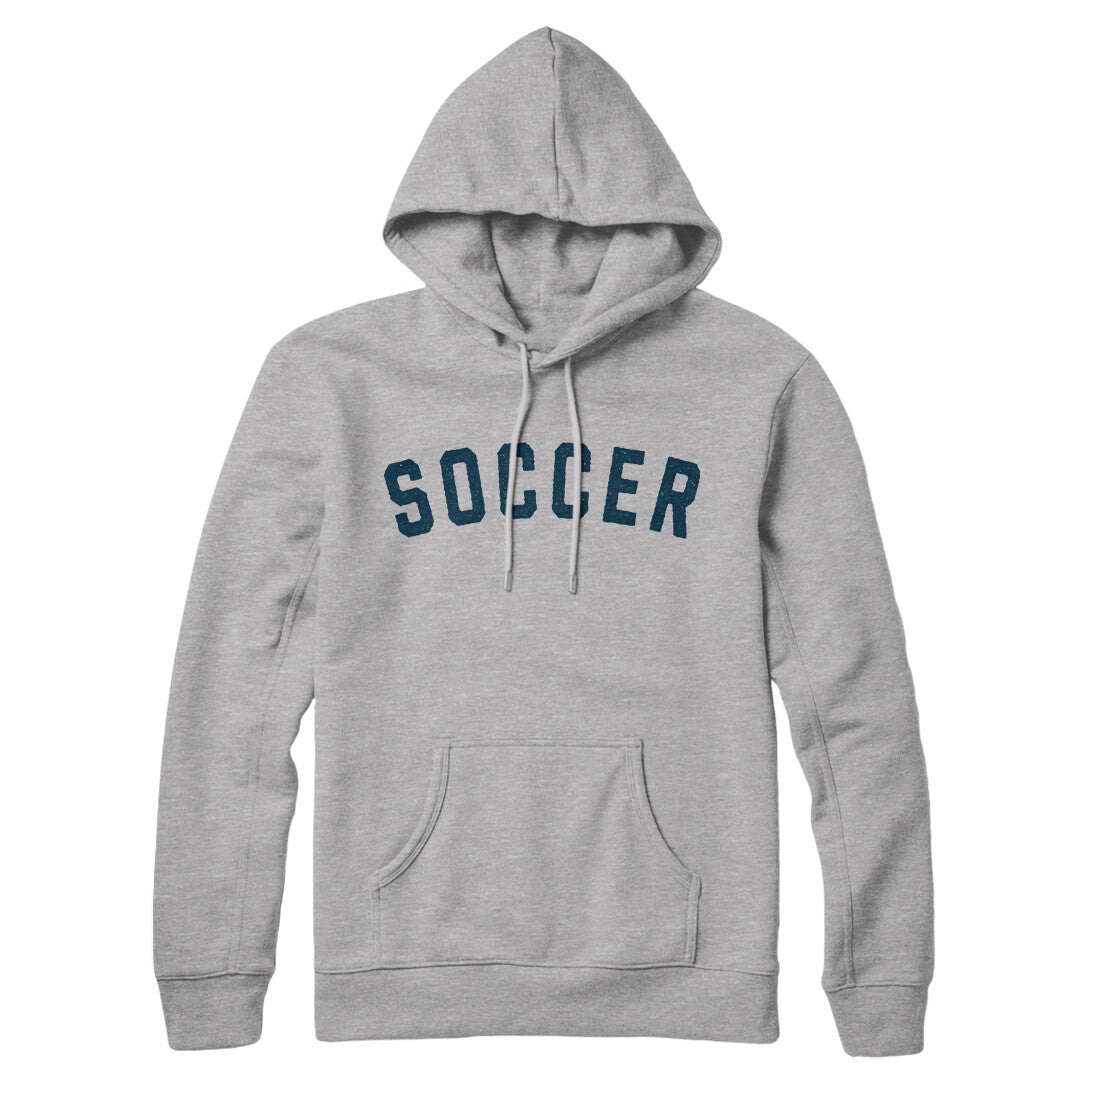 Soccer in Heather Grey Color